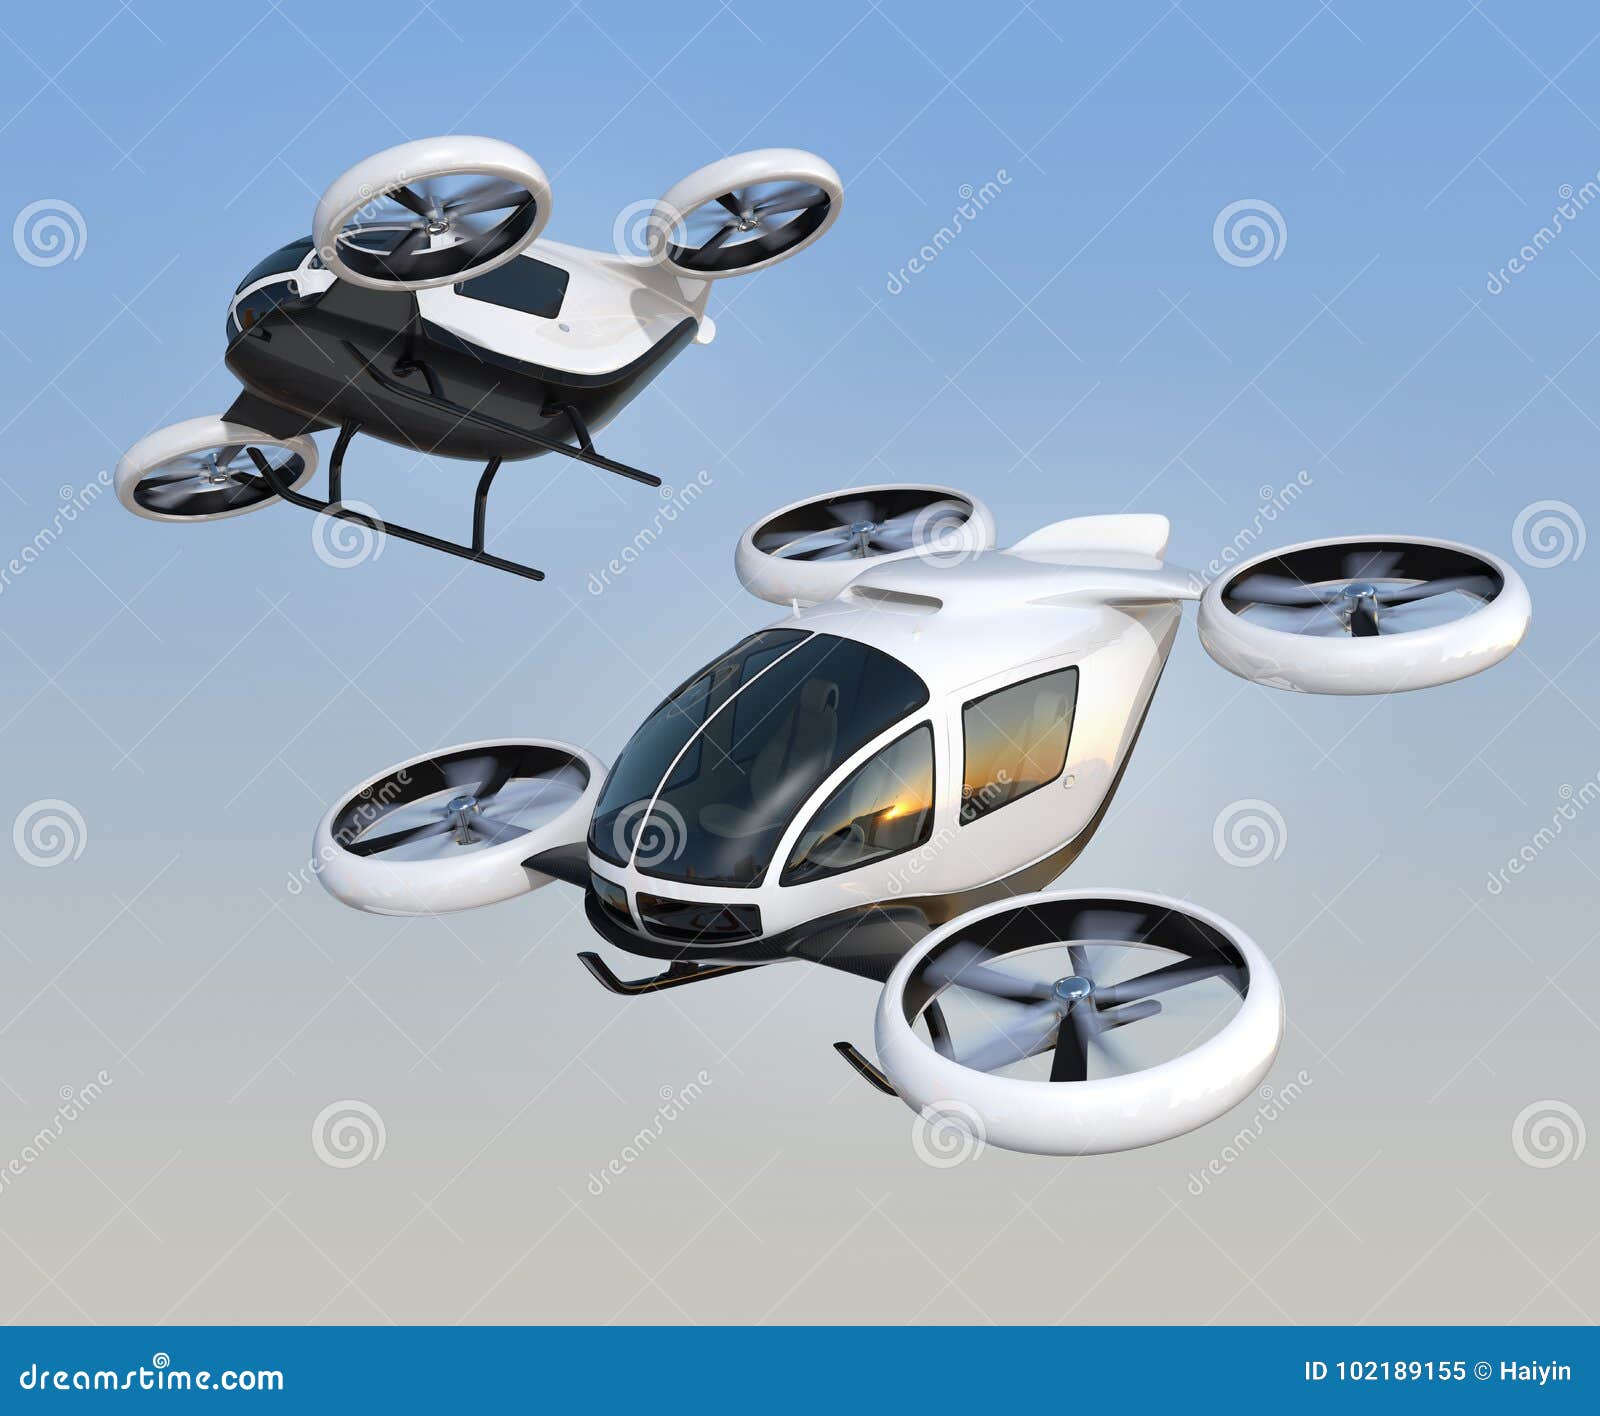 two self-driving passenger drones flying in the sky